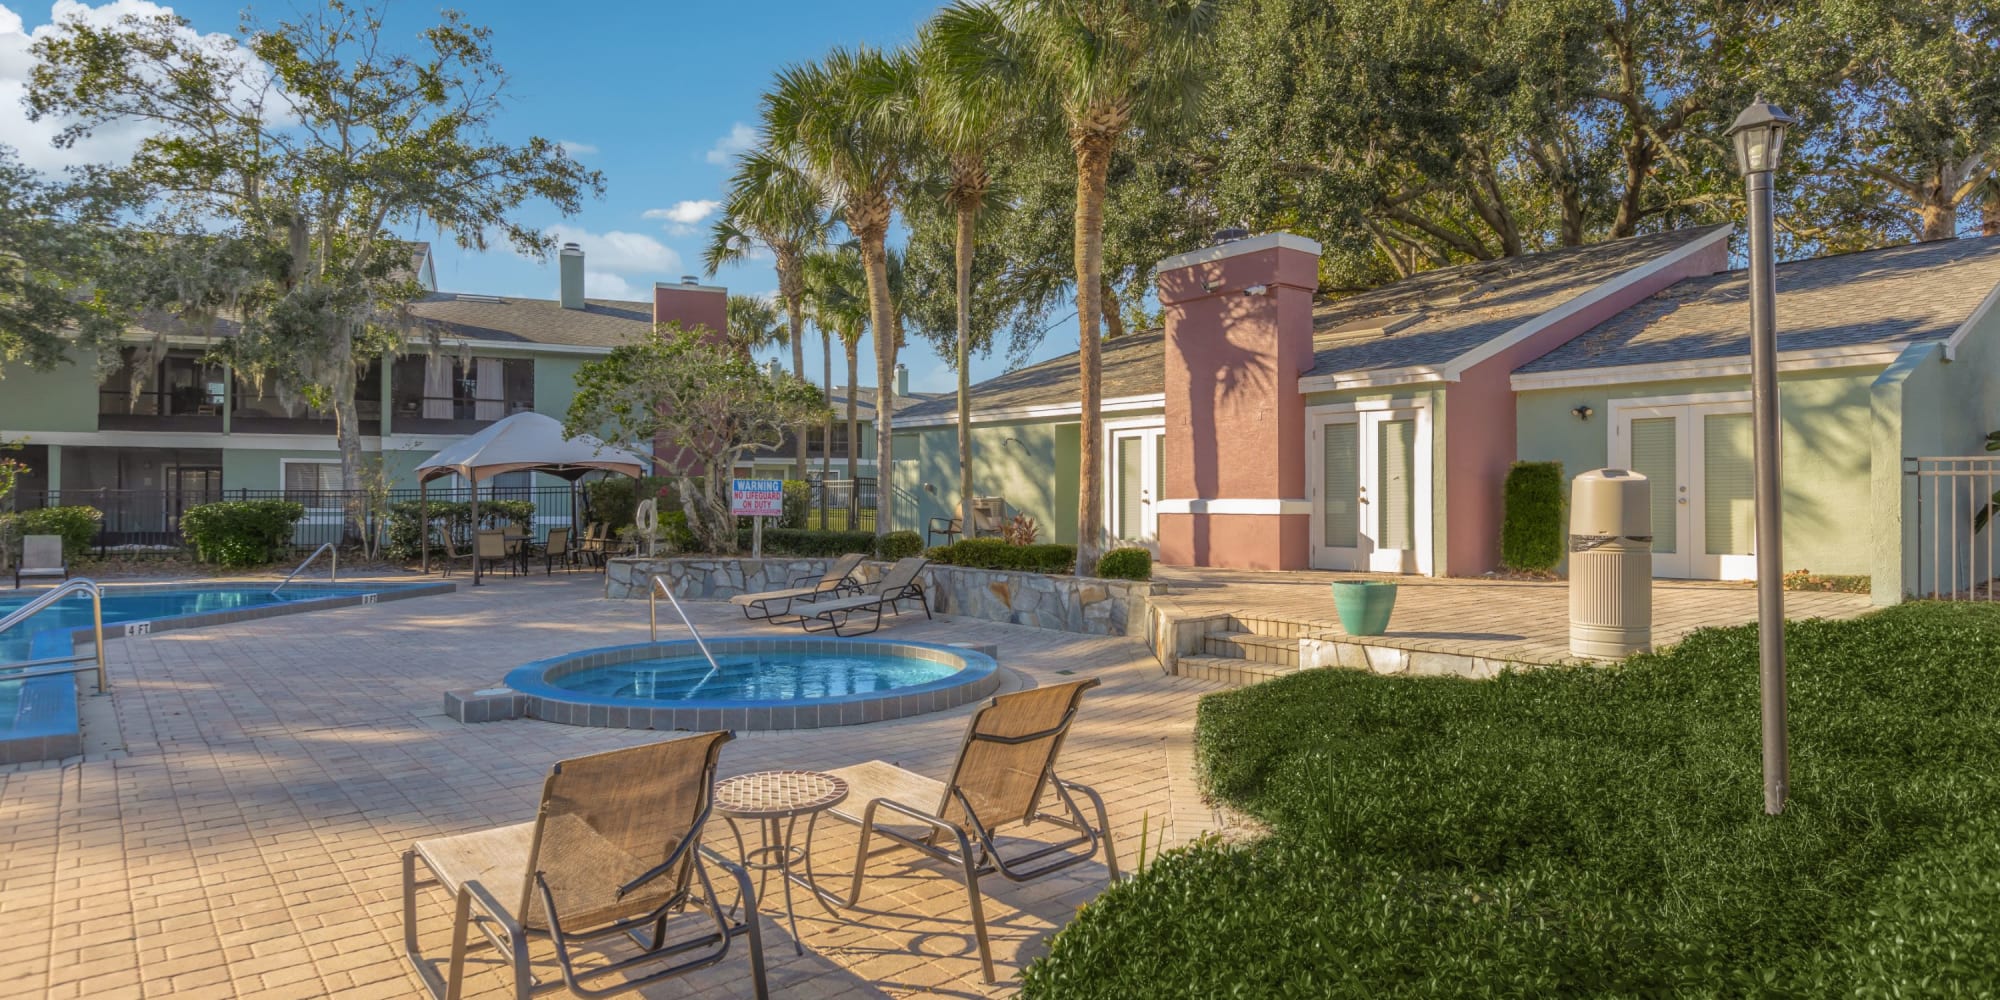 Lounge chairs by the pool at Stone Creek at Wekiva in Altamonte Springs, Florida